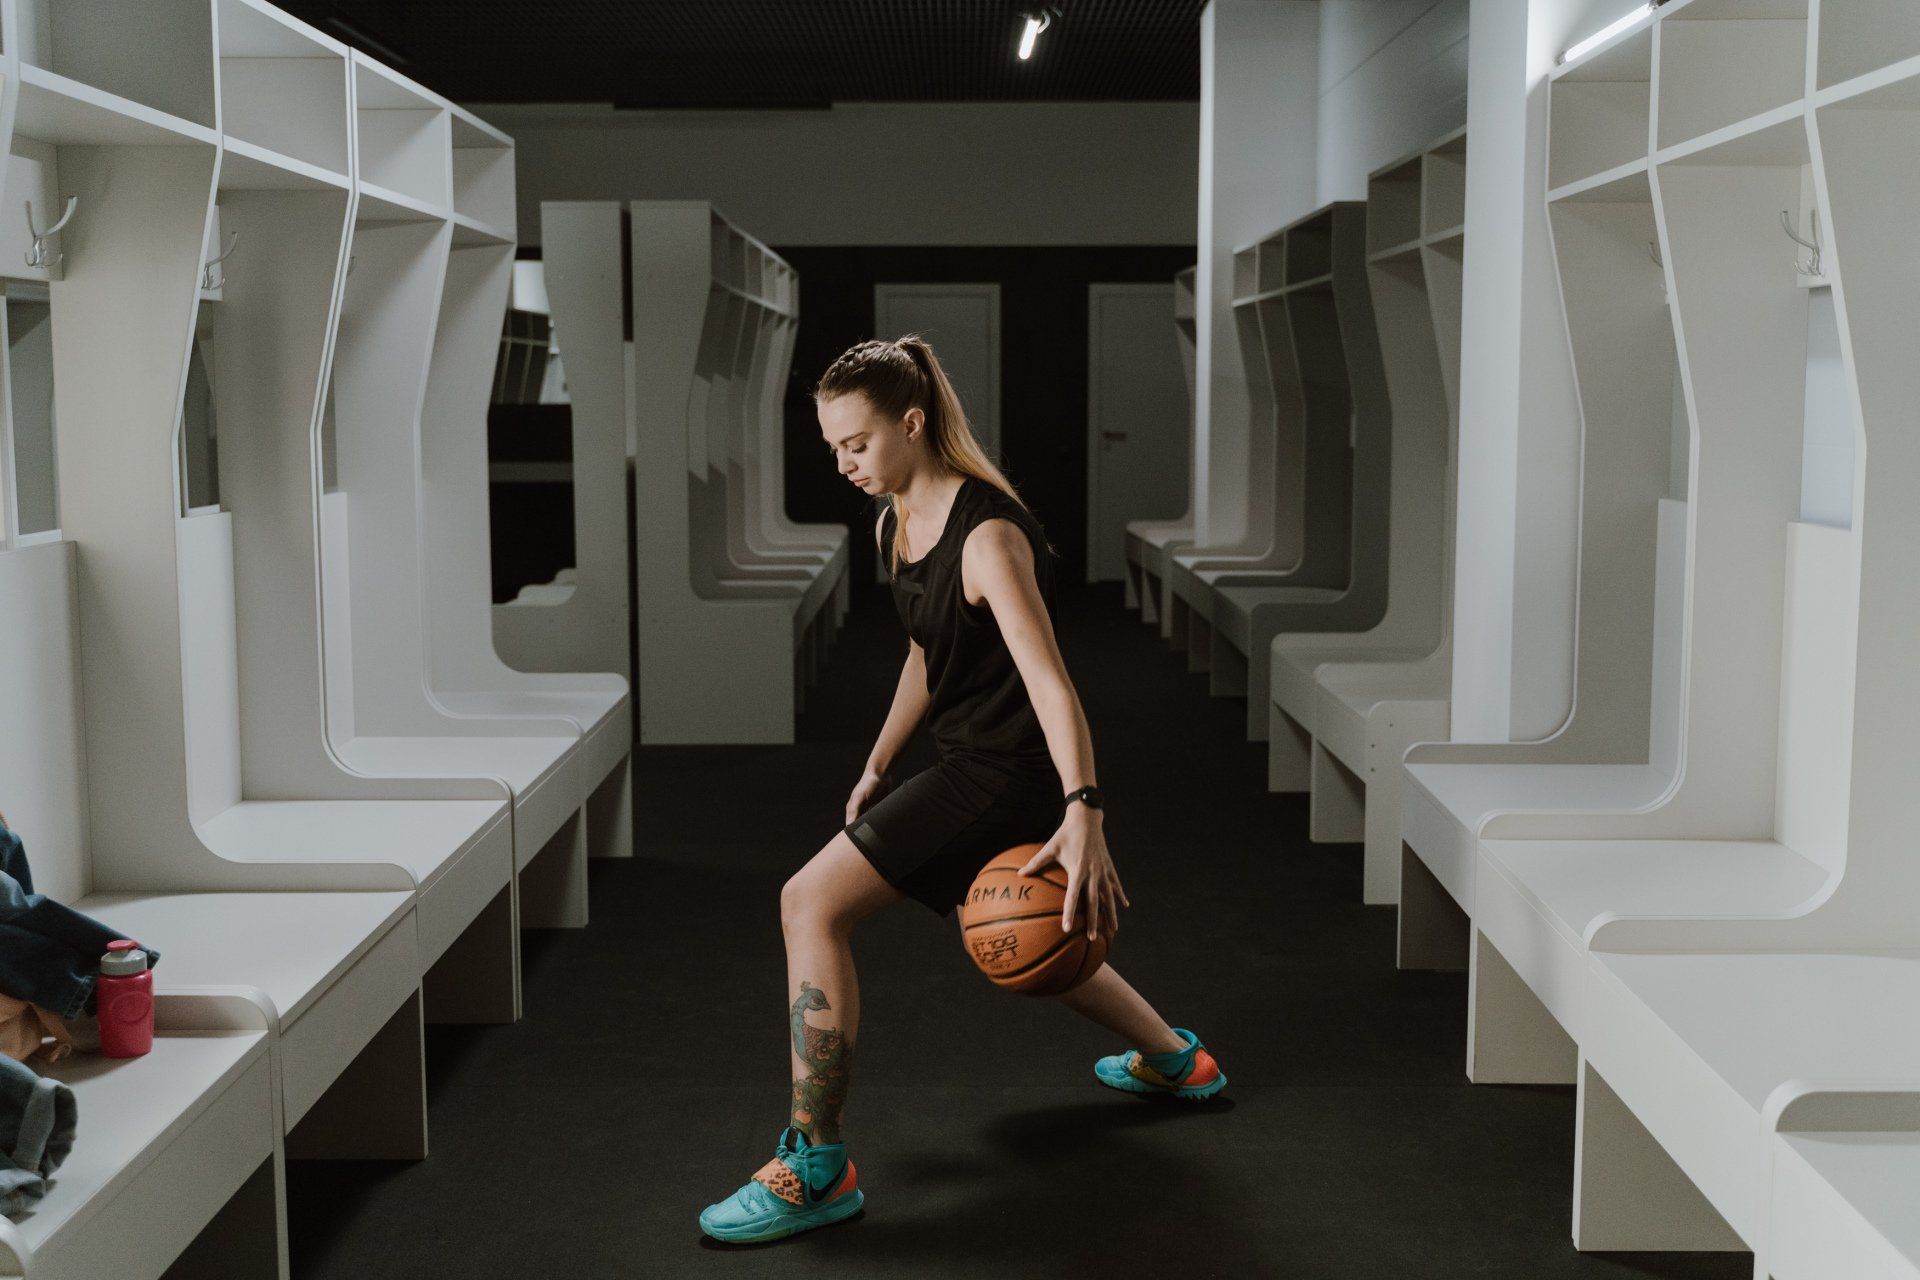 A woman is holding a basketball in a locker room.